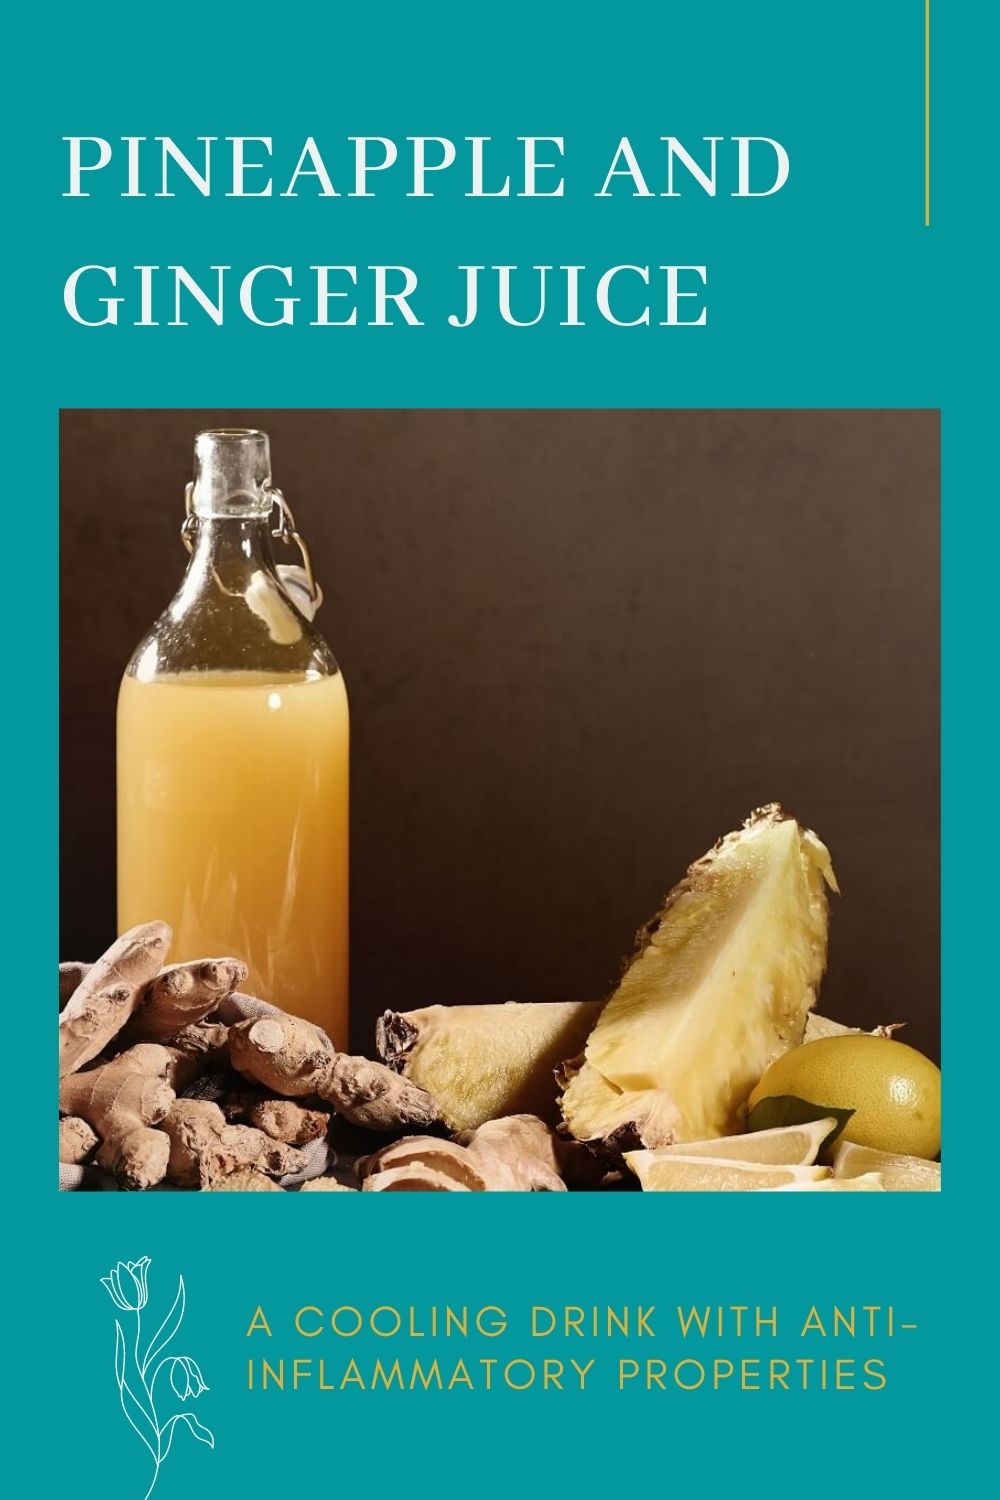 Pineapple and ginger juice – a cooling drink with anti-inflammatory properties